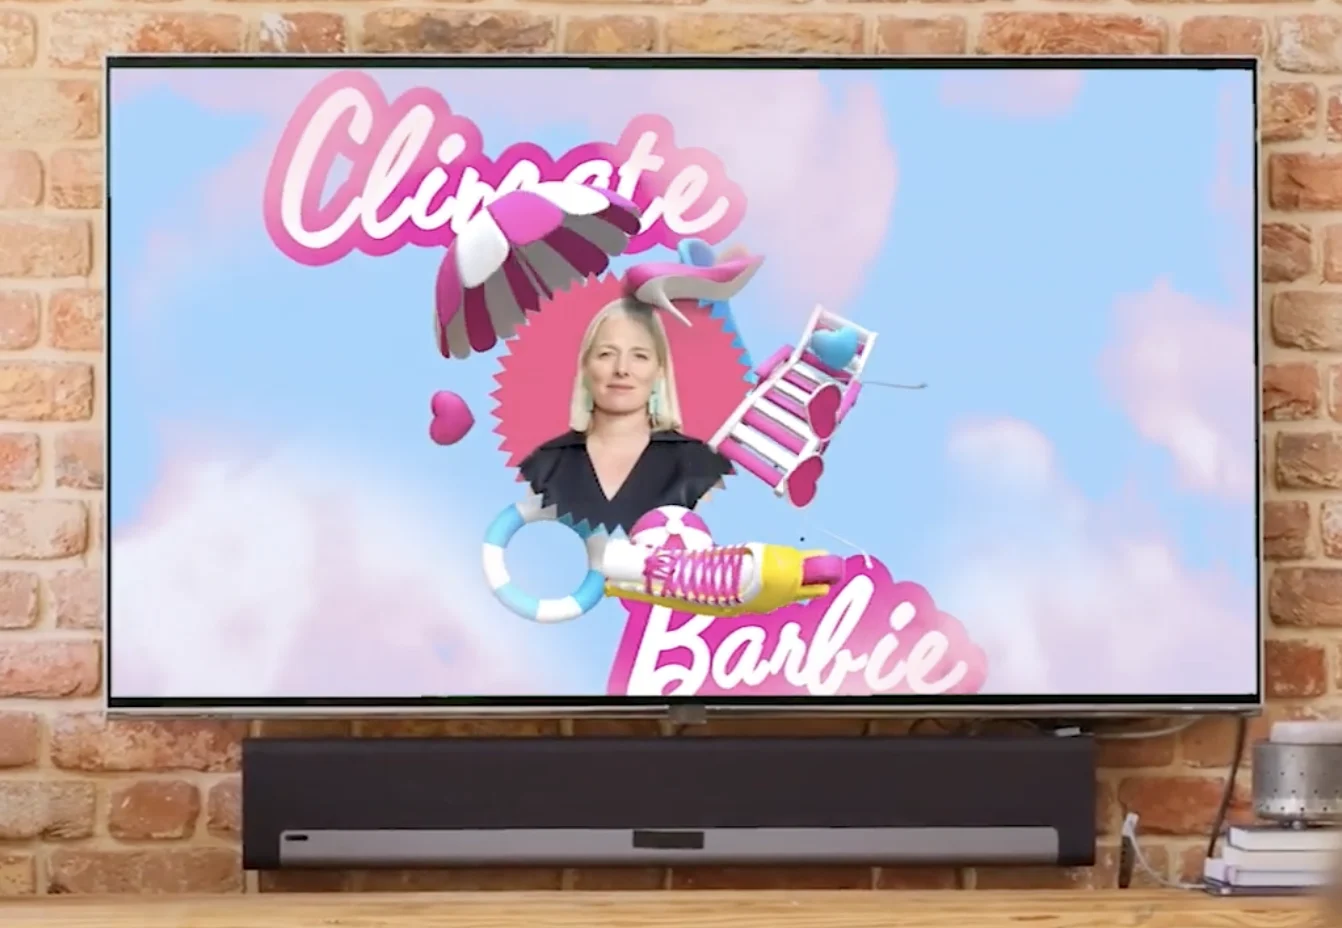 The Weather Network graphic: "Climate Barbie" Catharine McKenna